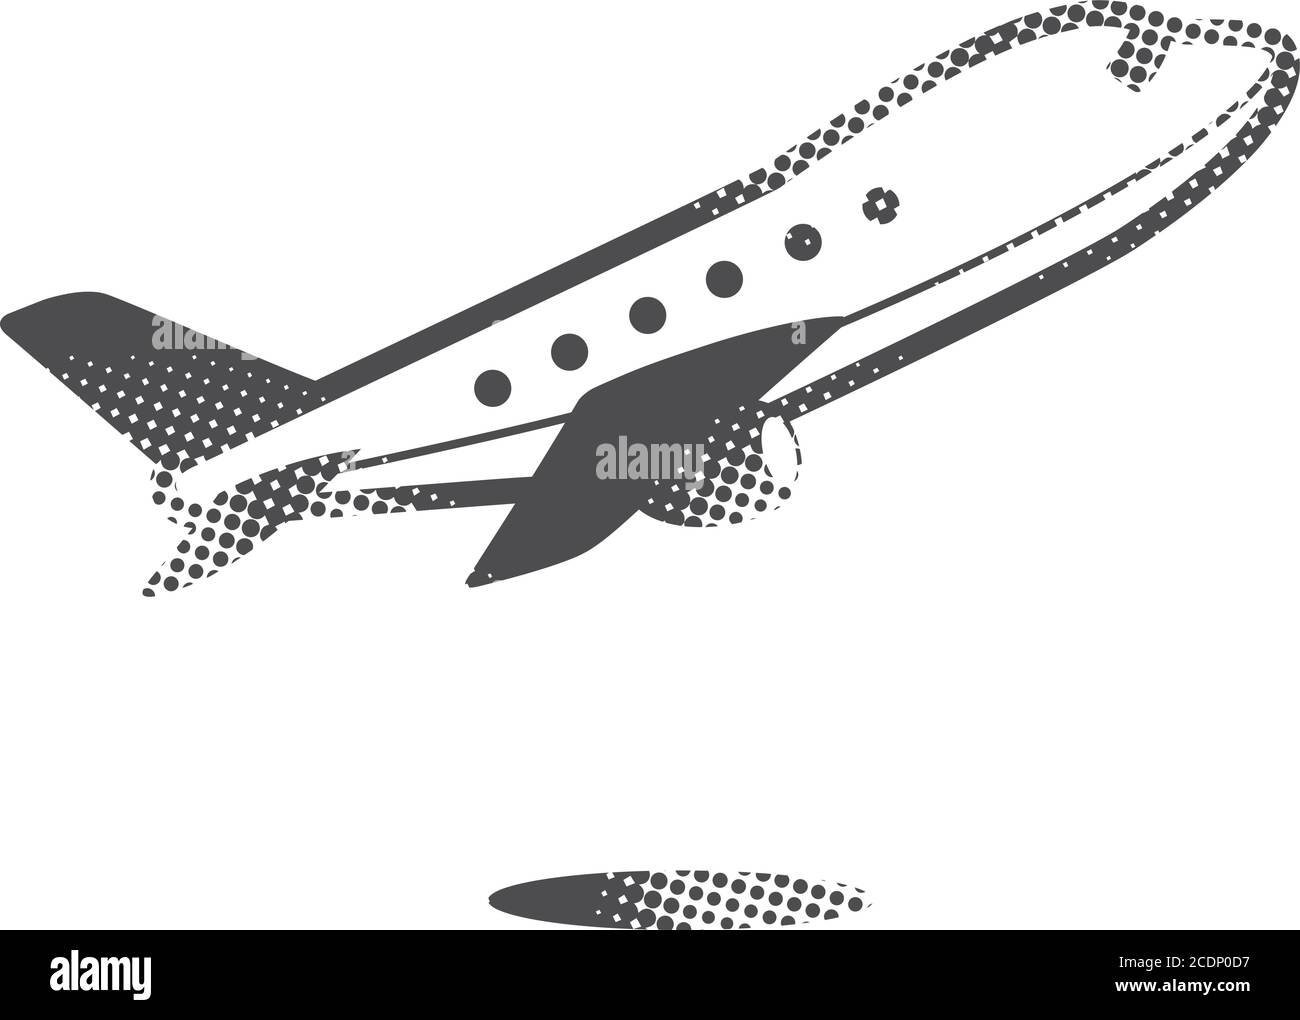 Airplane icon in halftone style. Black and white monochrome vector illustration. Stock Vector